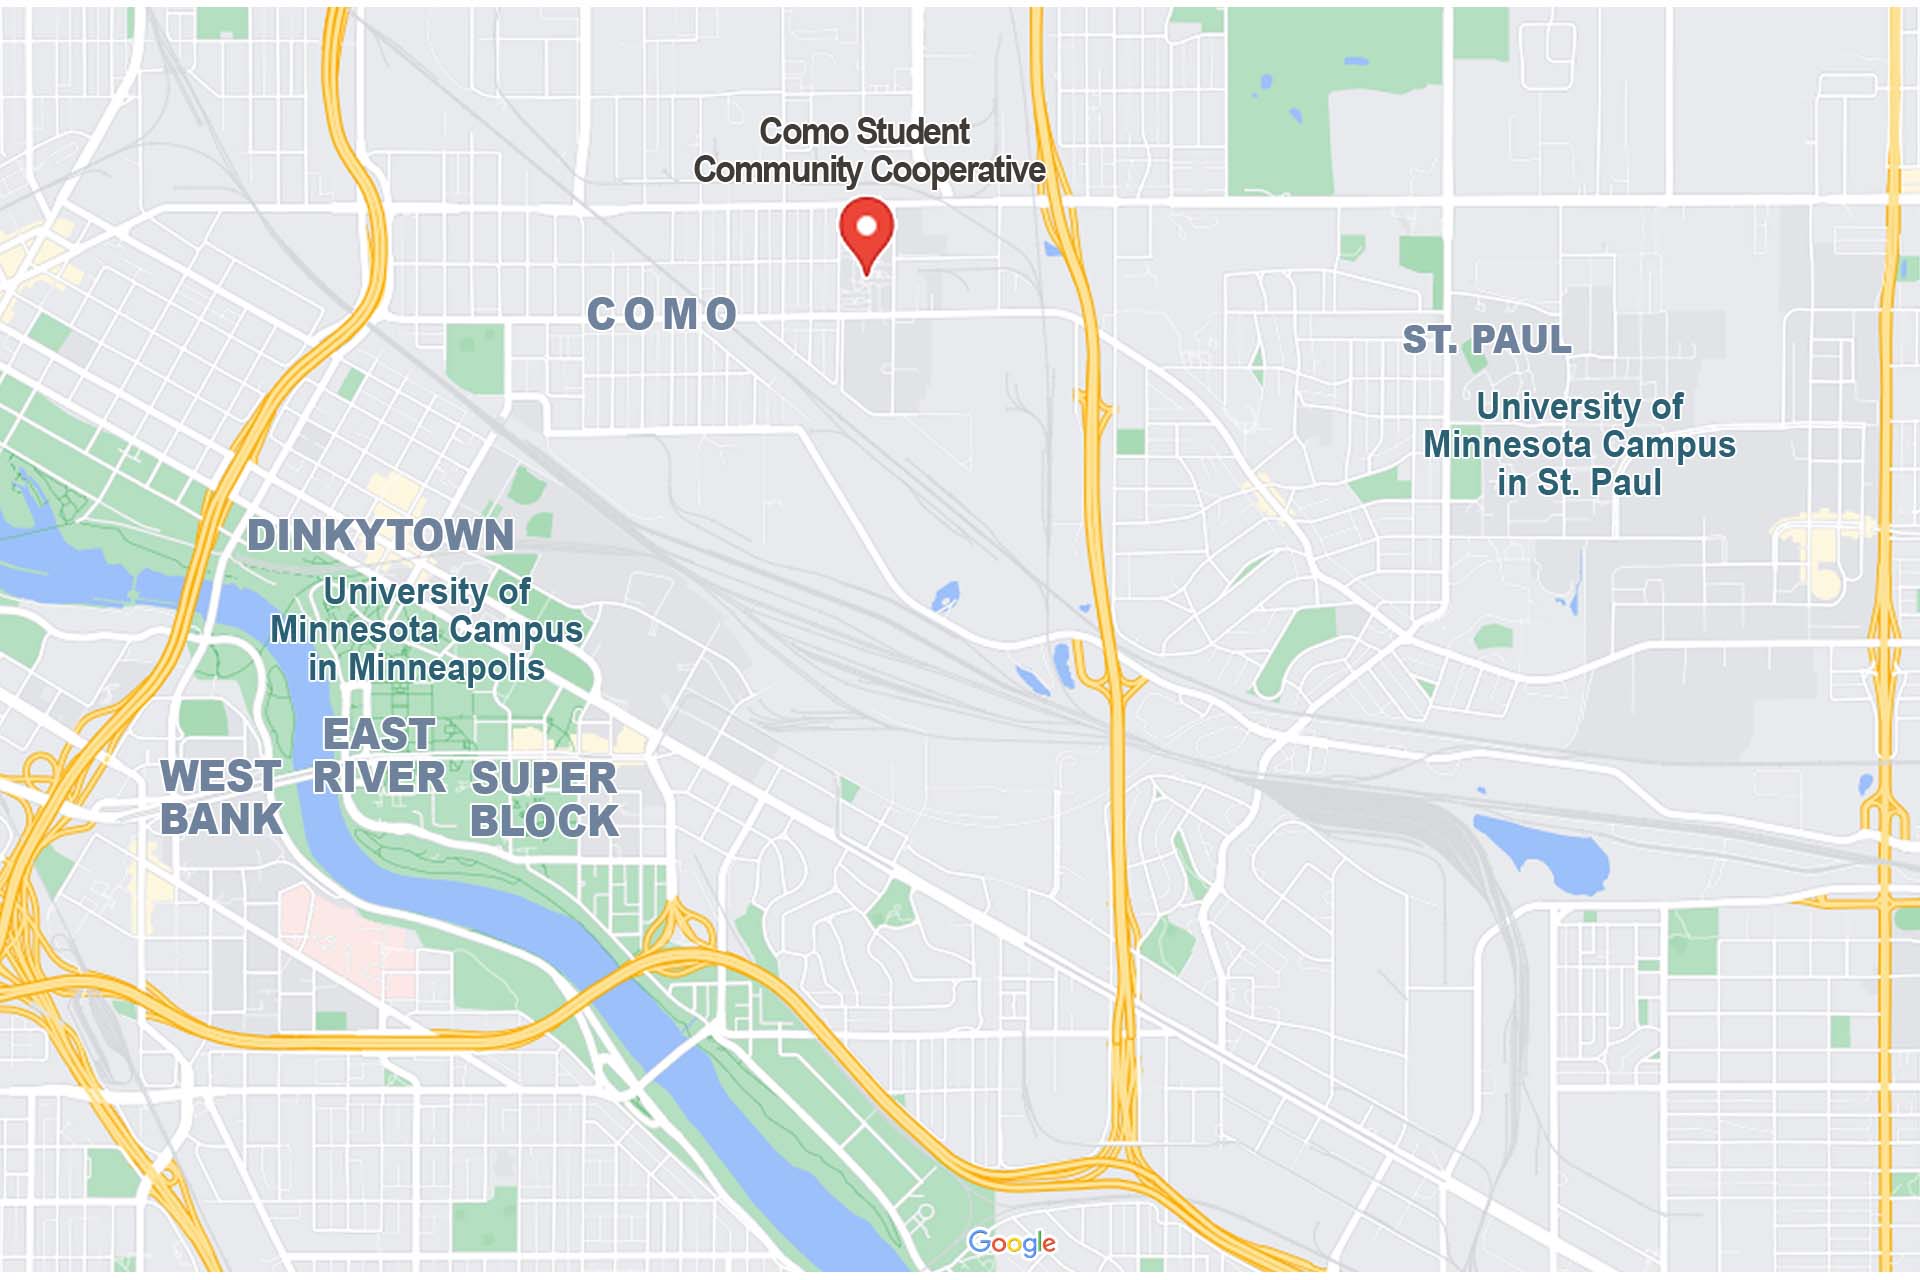 Map showing the location of our Como neighborhood northeast of Dinkytown and east-northeast of the UMN campus in Saint Paul